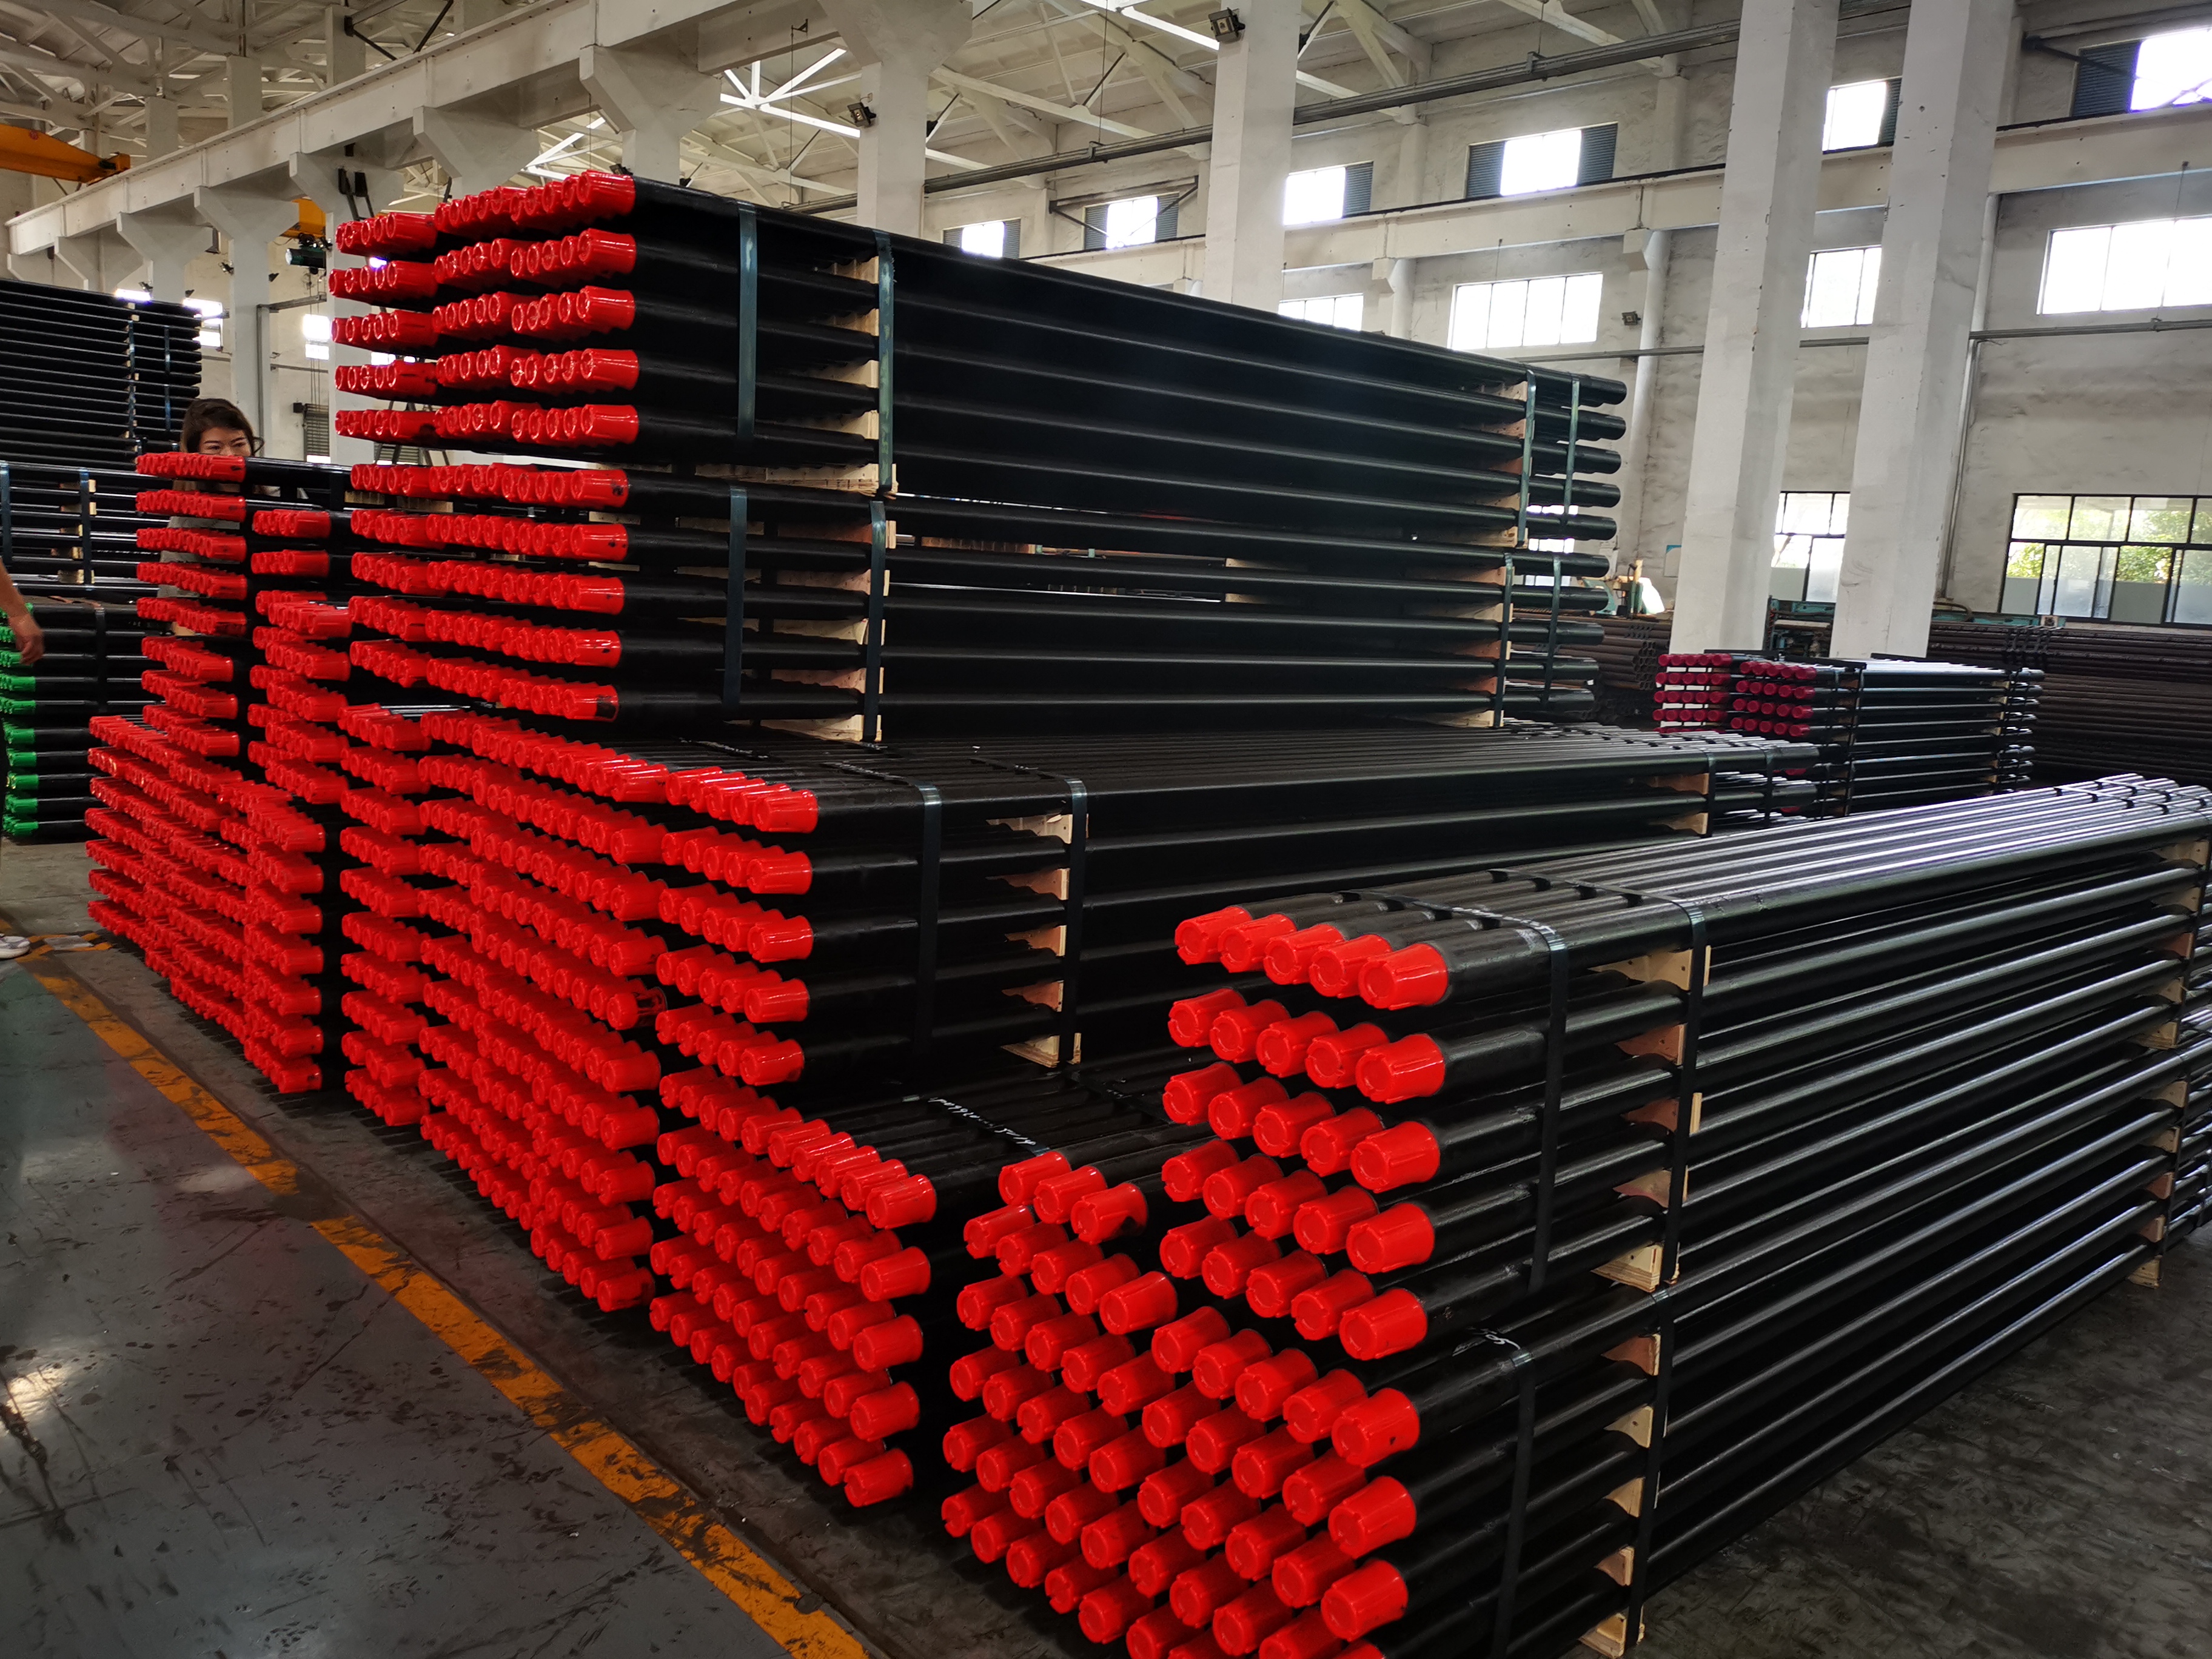 HDD Drill Rods For Chinese And Overseas HDD Drill Rigs